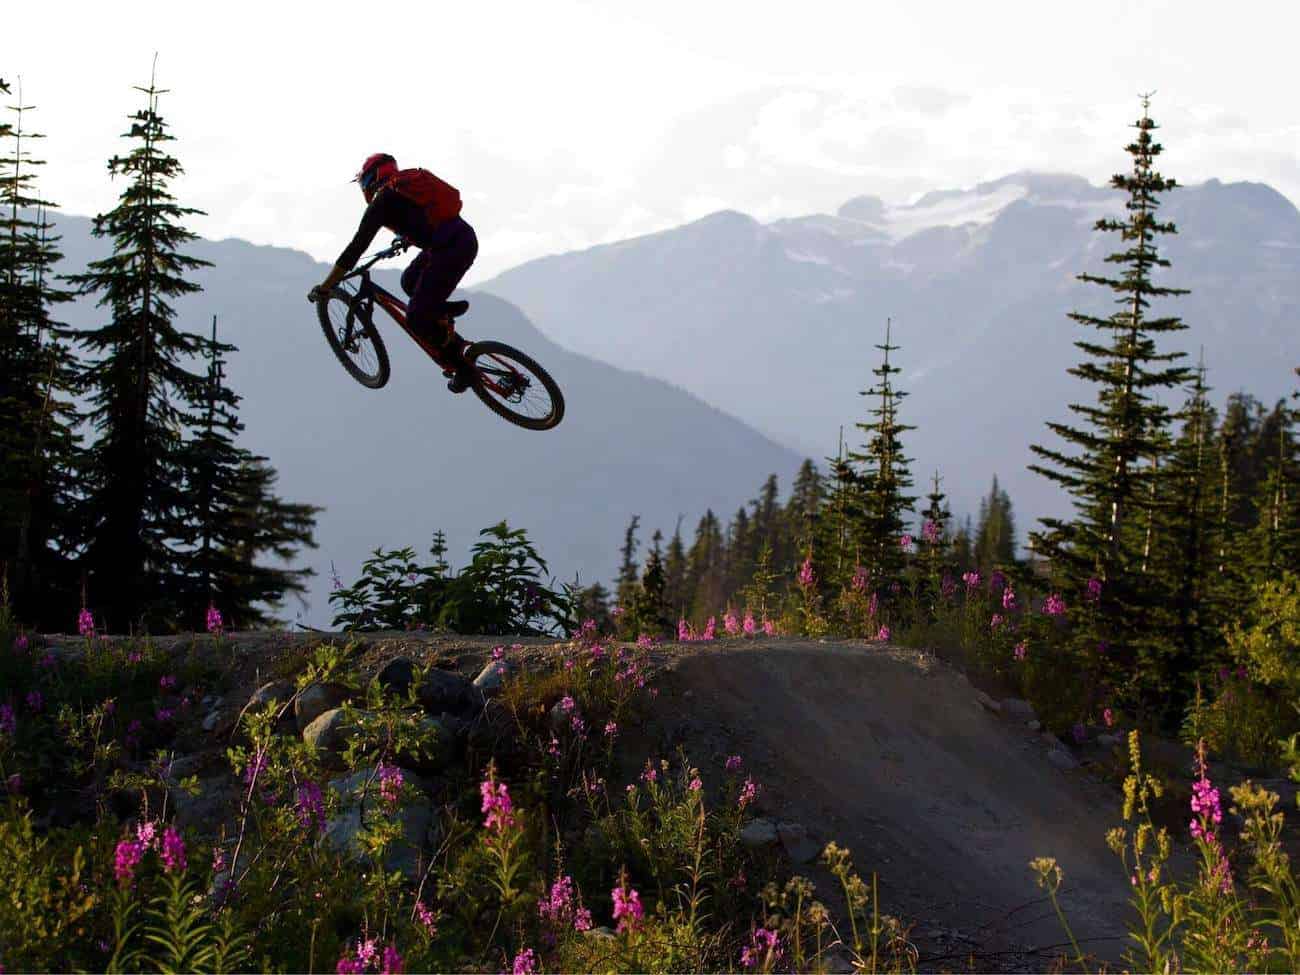 Mountain biker in the air after going over jump at bike park in Canada with snow capped mountains in background